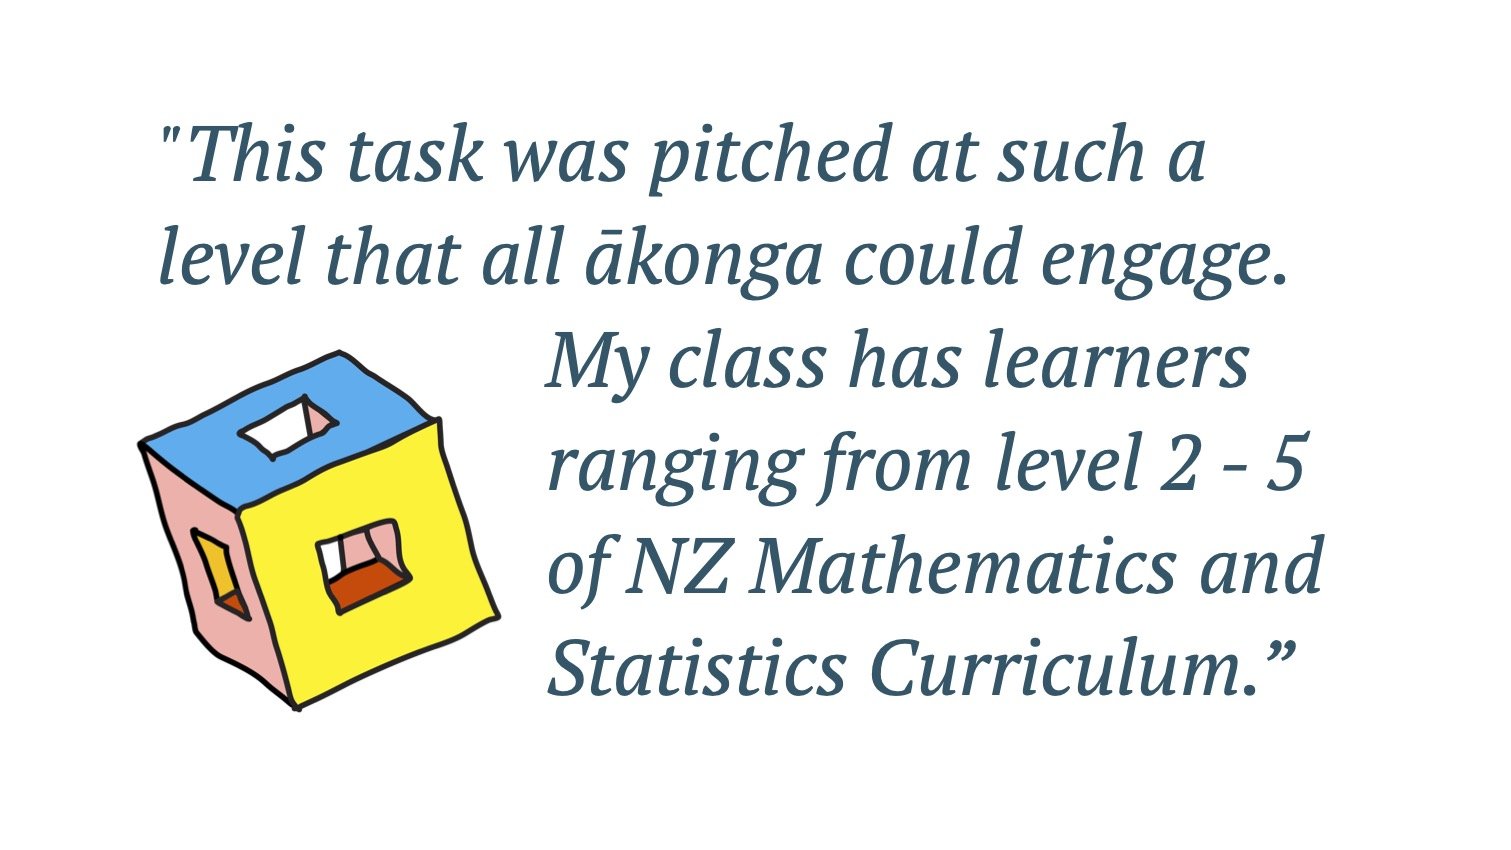 Quote: This task was pitched at such a level that all ākonga could engage. My class has learners ranging from level 2 - 5 of NZ Mathematics and Statistics Curriculum.